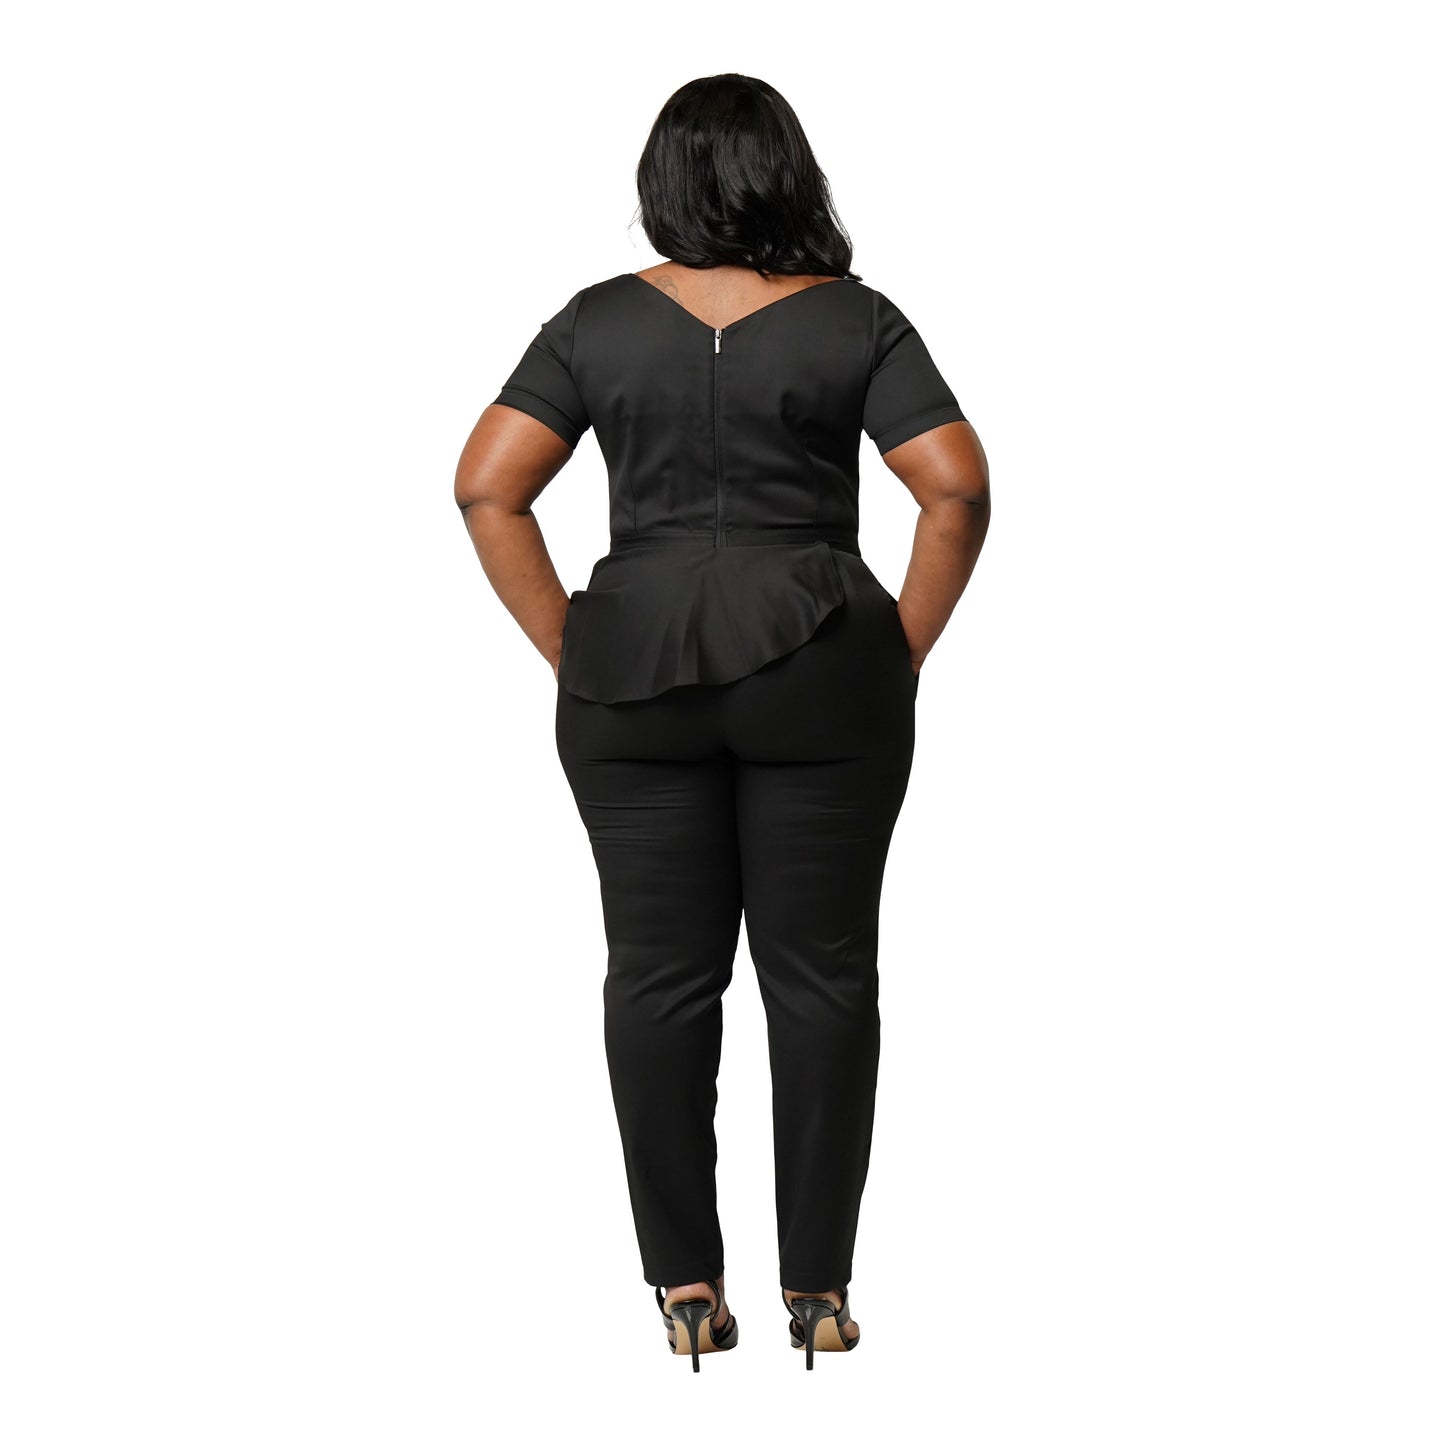 Red Peplum Plus Size Elegant Jumpsuits For Women Ultra Thin, Asymmetrical  Collar, Long Sleeves, Elegant, And Perfect For Office, Parties, Or Home  From Cong00, $26.8 | DHgate.Com